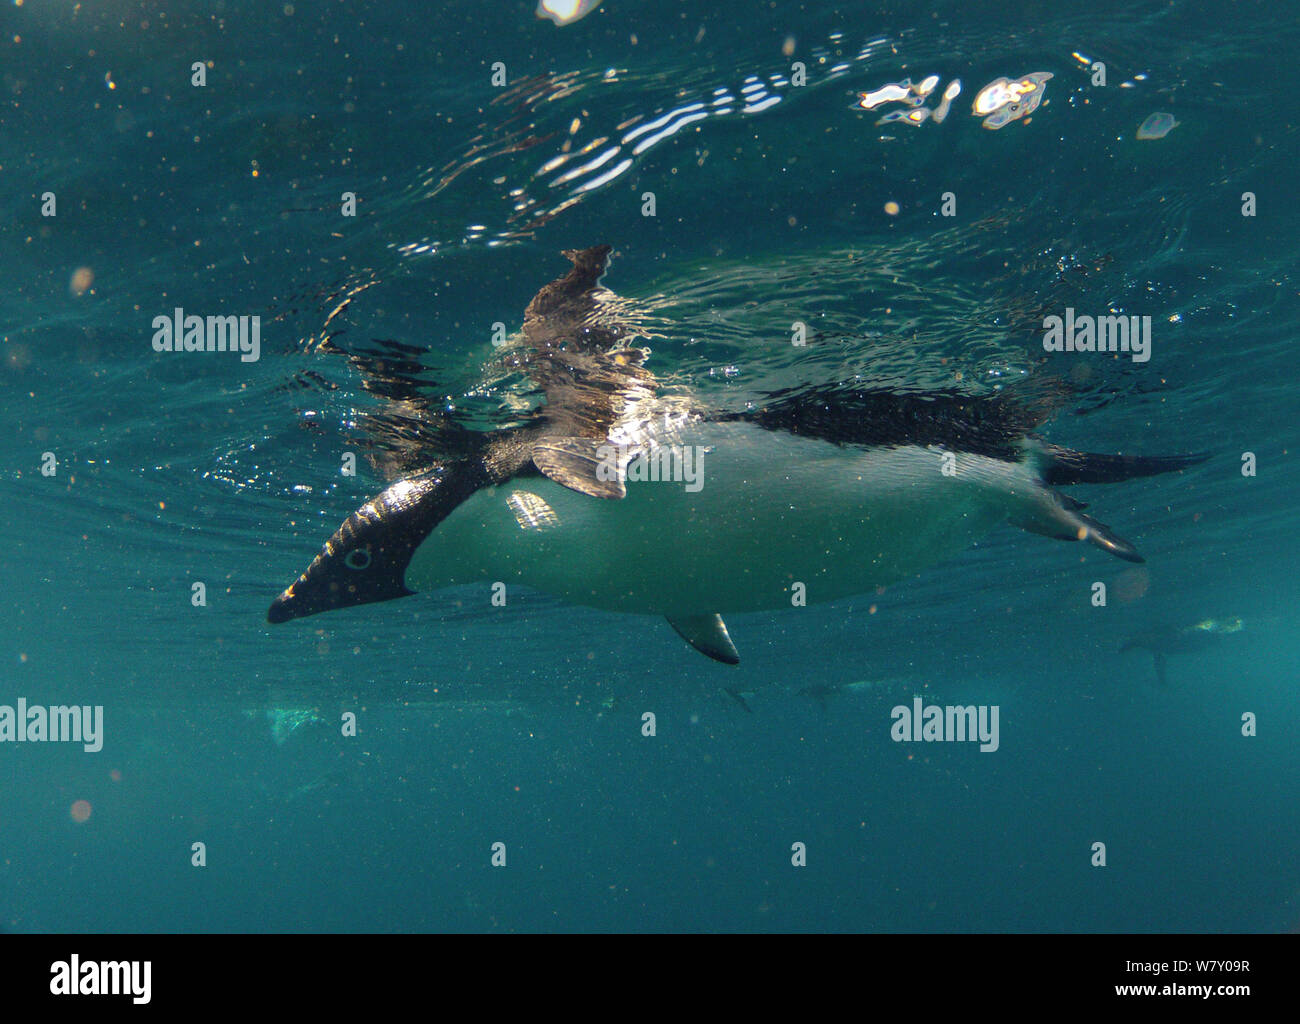 Adelie penguin (Pygoscelis adeliae) swimming near surface, Antarctica. Small reproduction only. Stock Photo